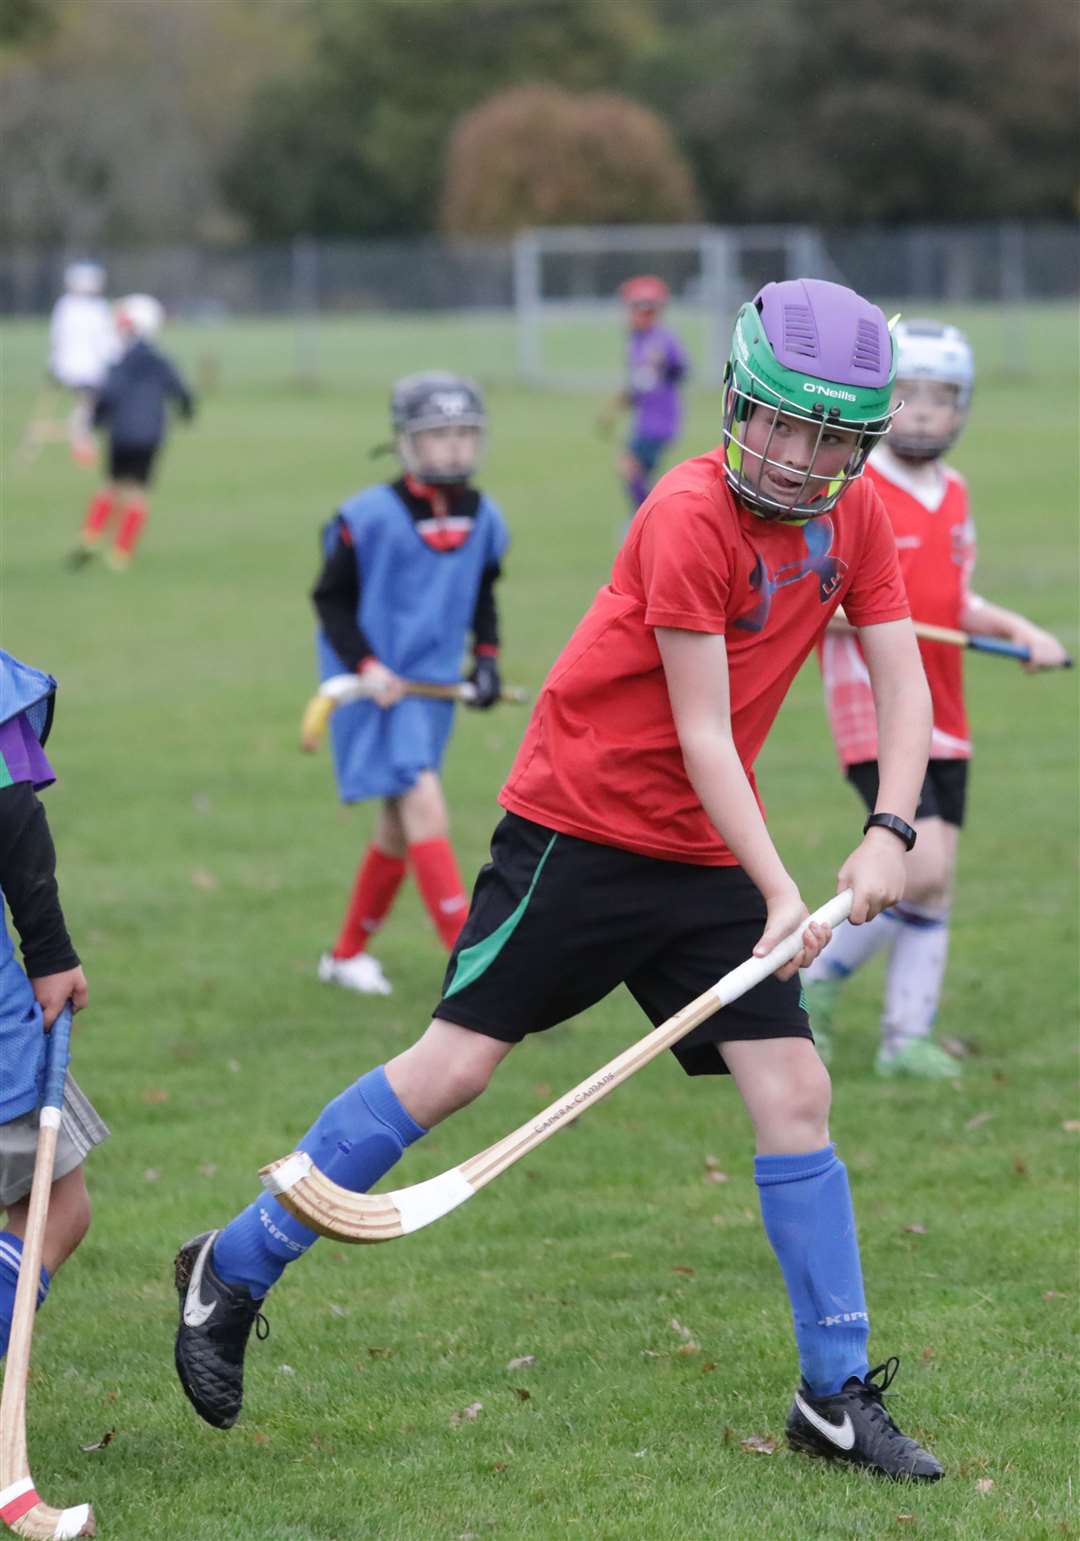 Could shinty take off in Moray?